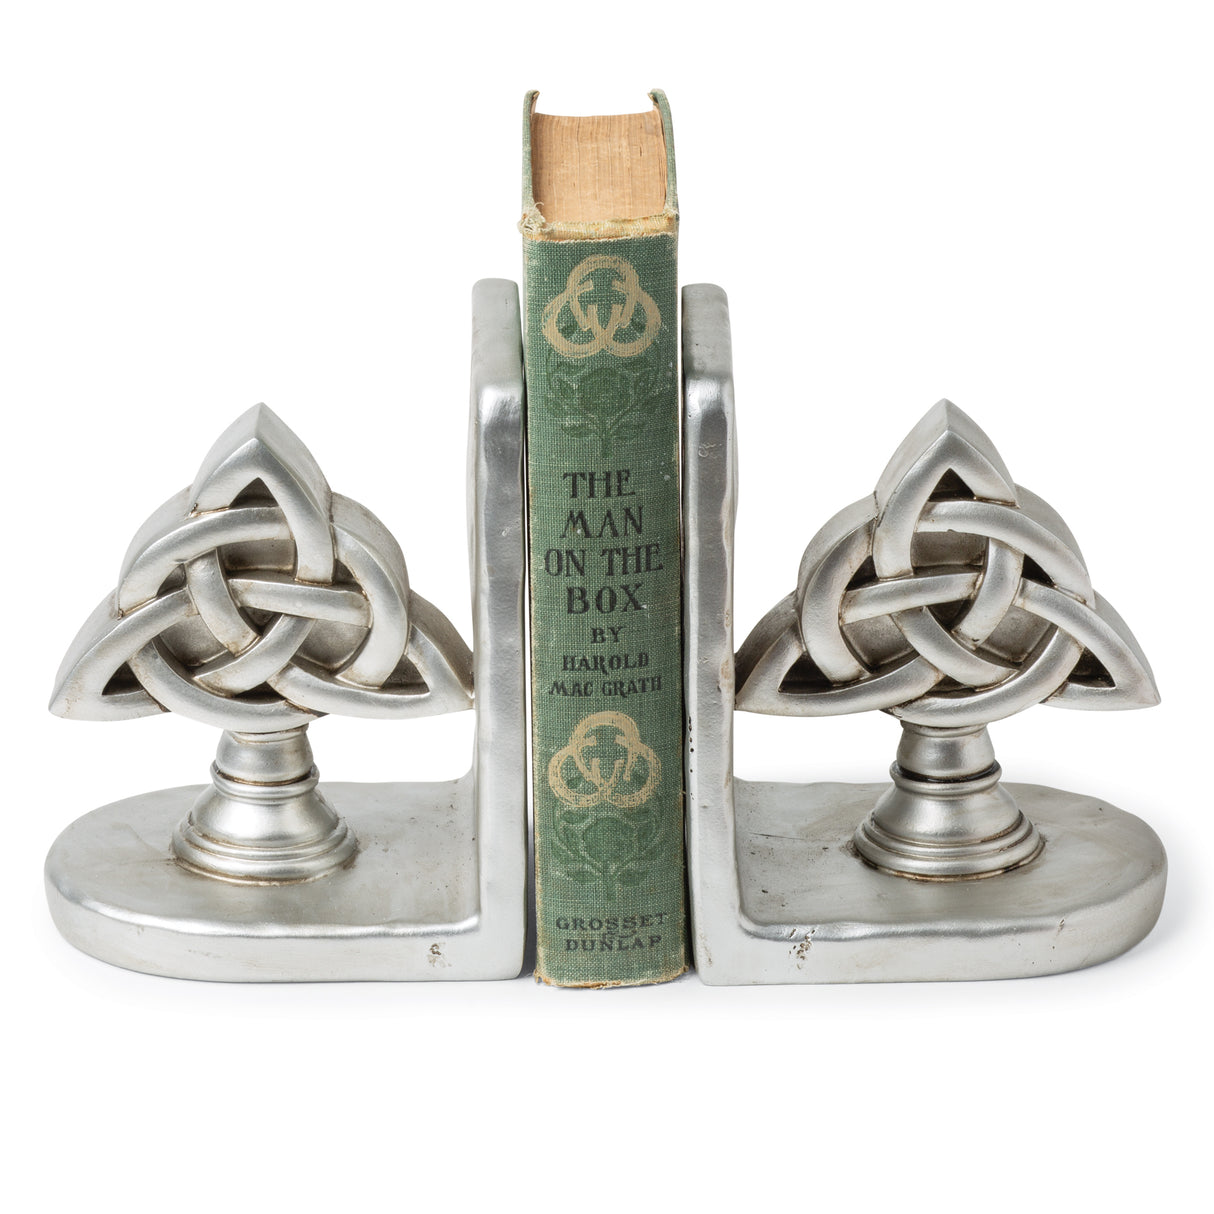 Brushed Nickel Celtic Knot Bookends - Creative Irish Gifts